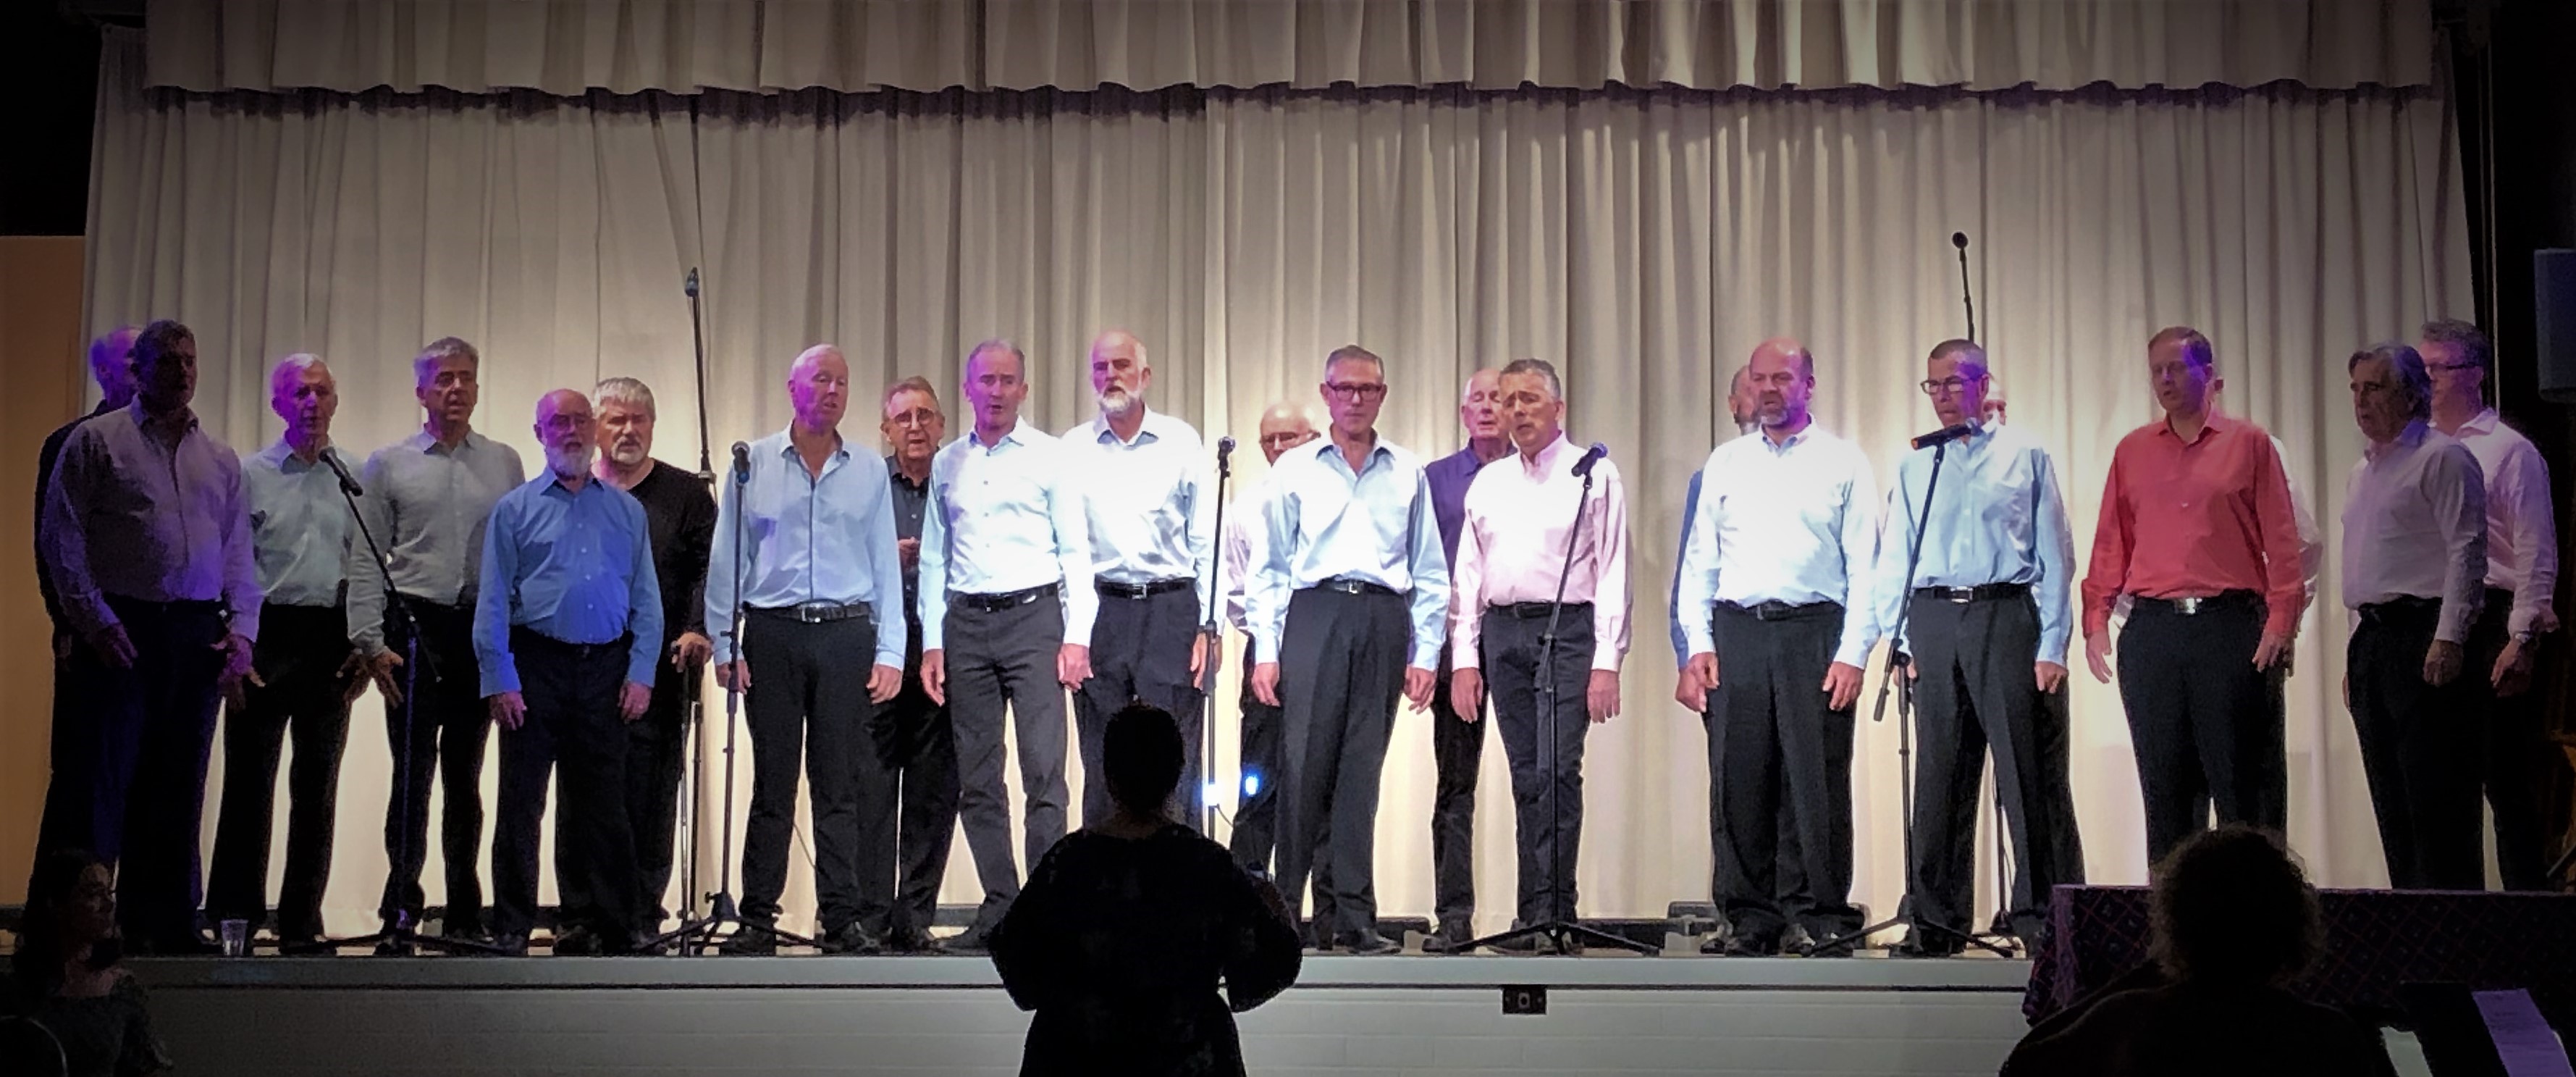 VoiceMale Men's Choir performing in concert on stage